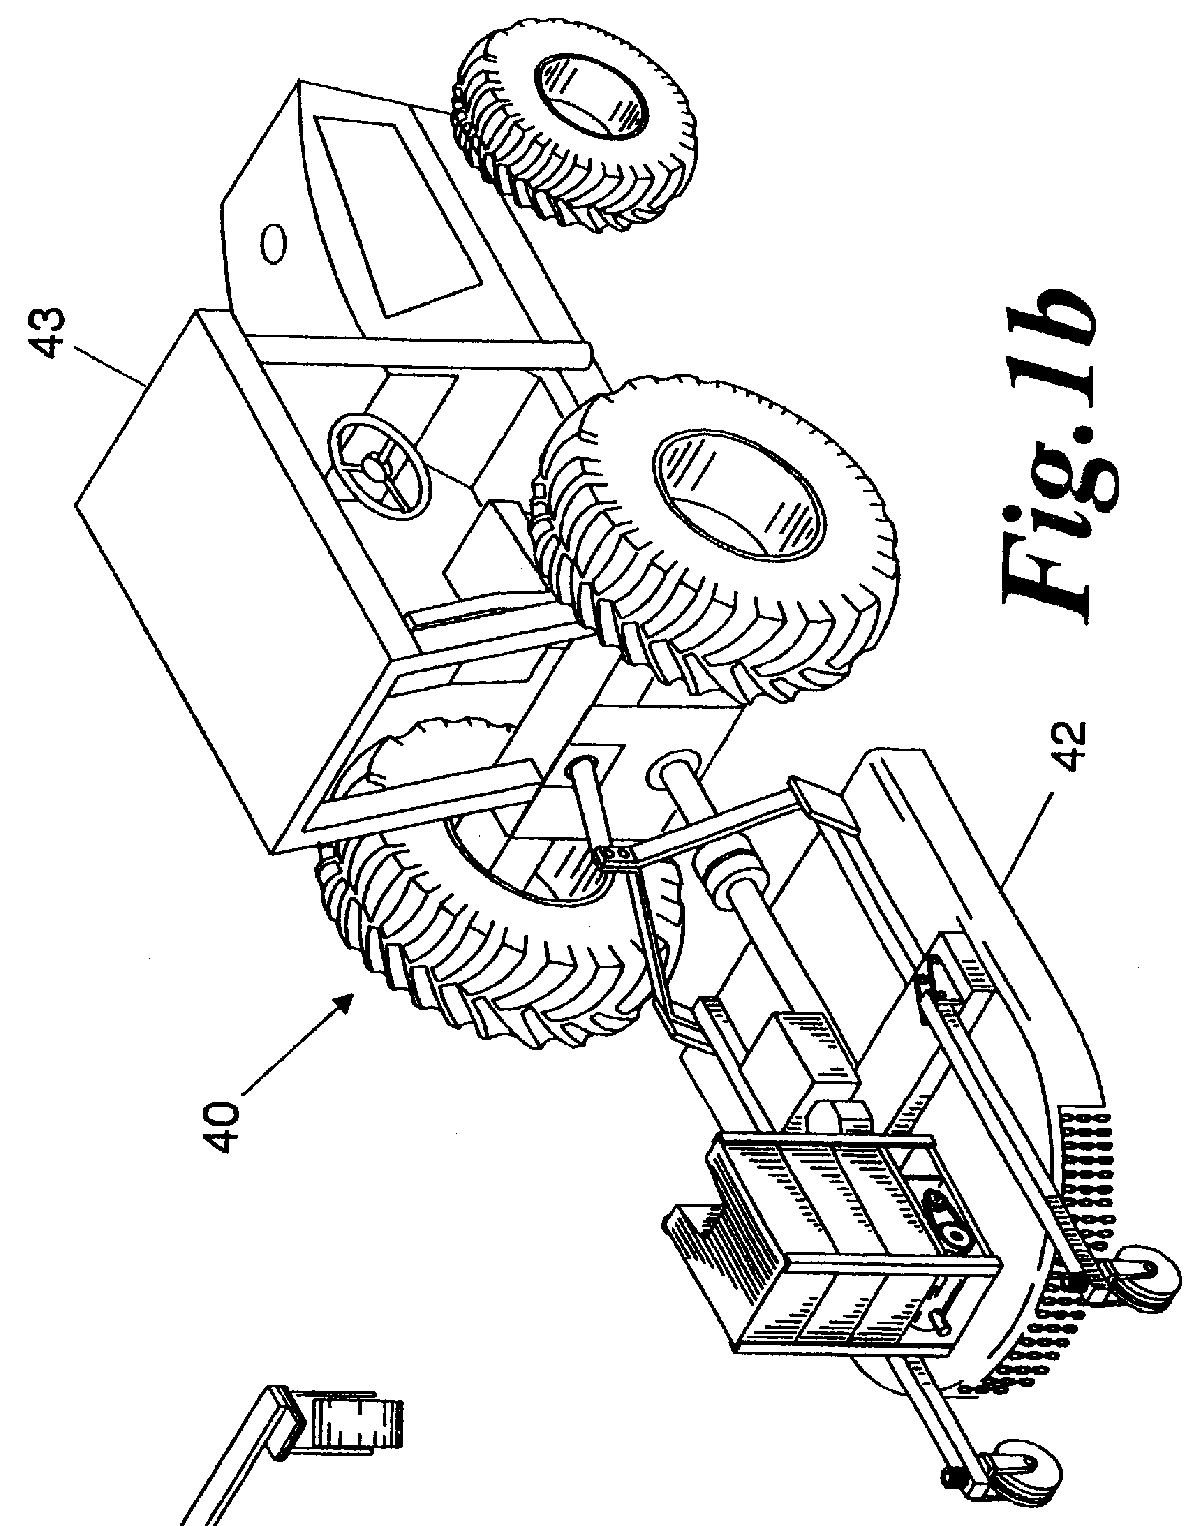 Apparatus and method for cutting and treating vegetation